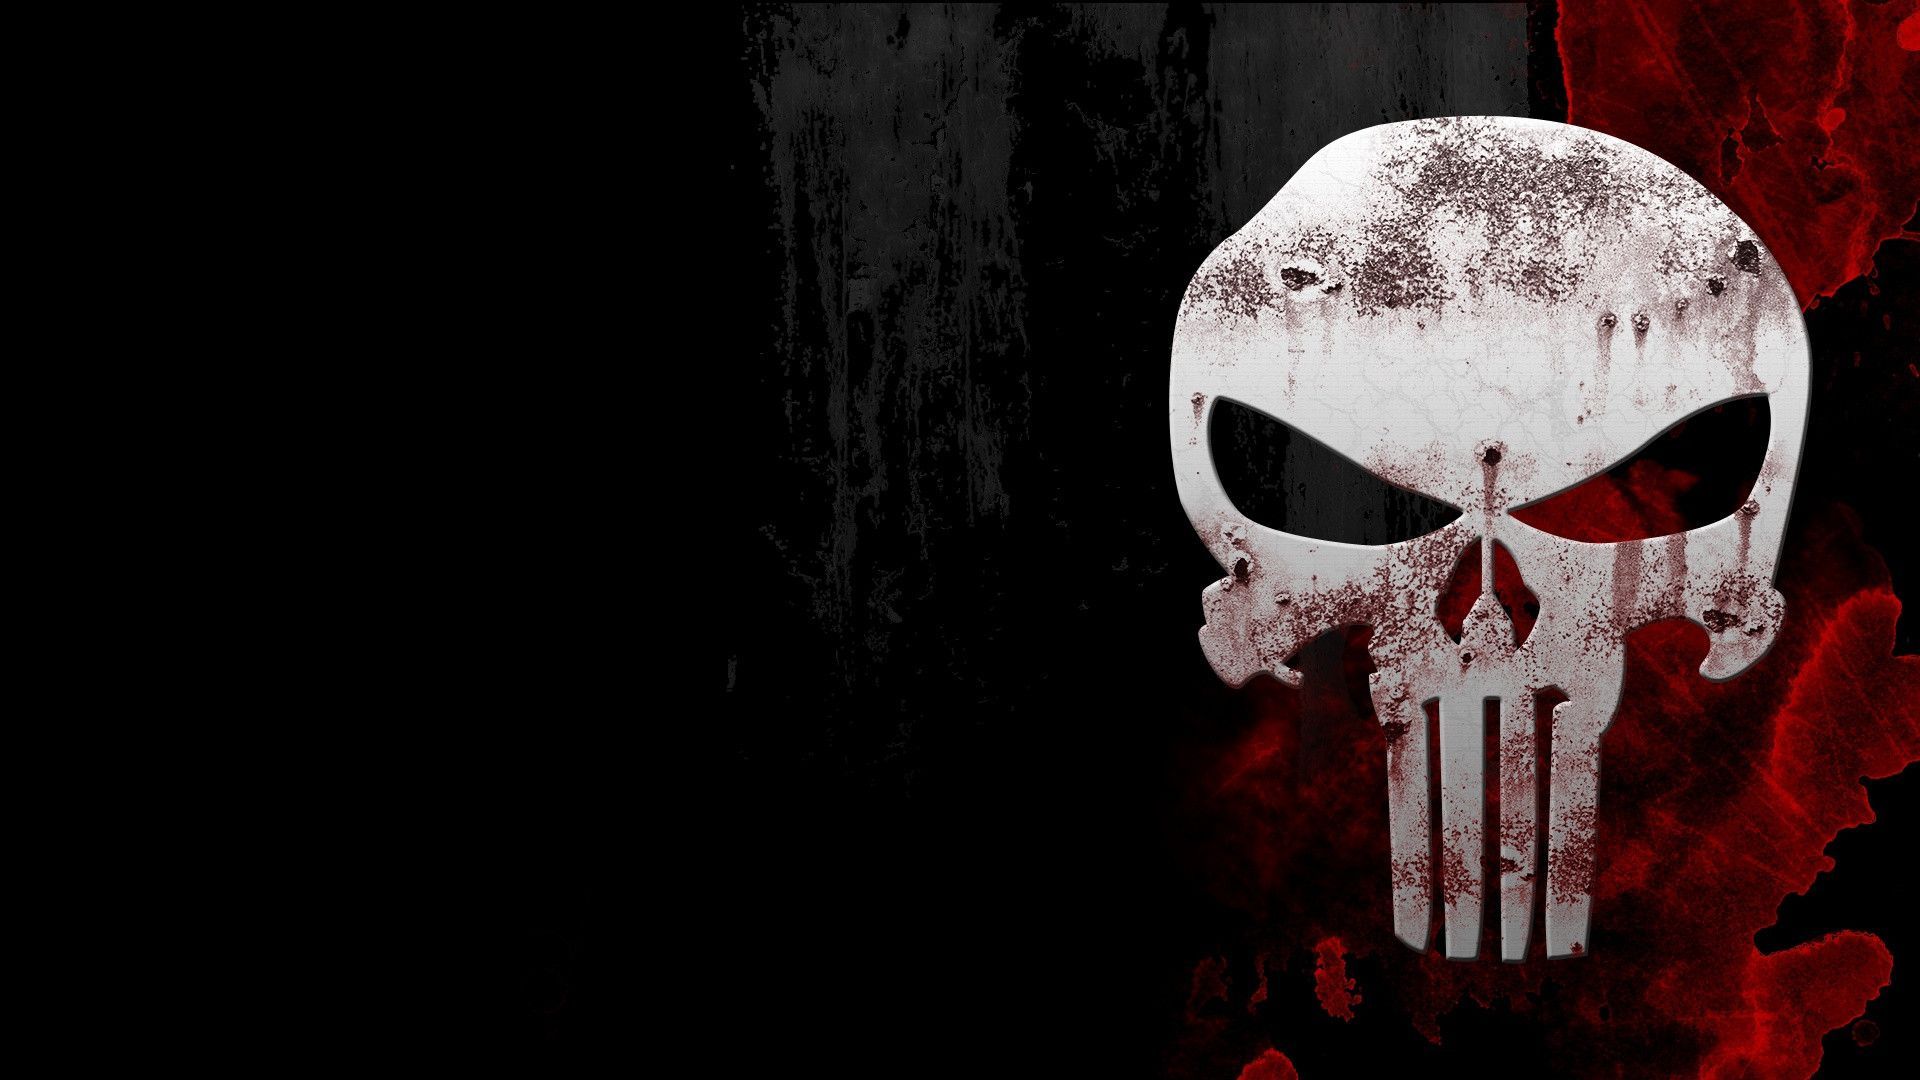 Skull HD Photo Wallpapers 14578 - HD Wallpapers Site